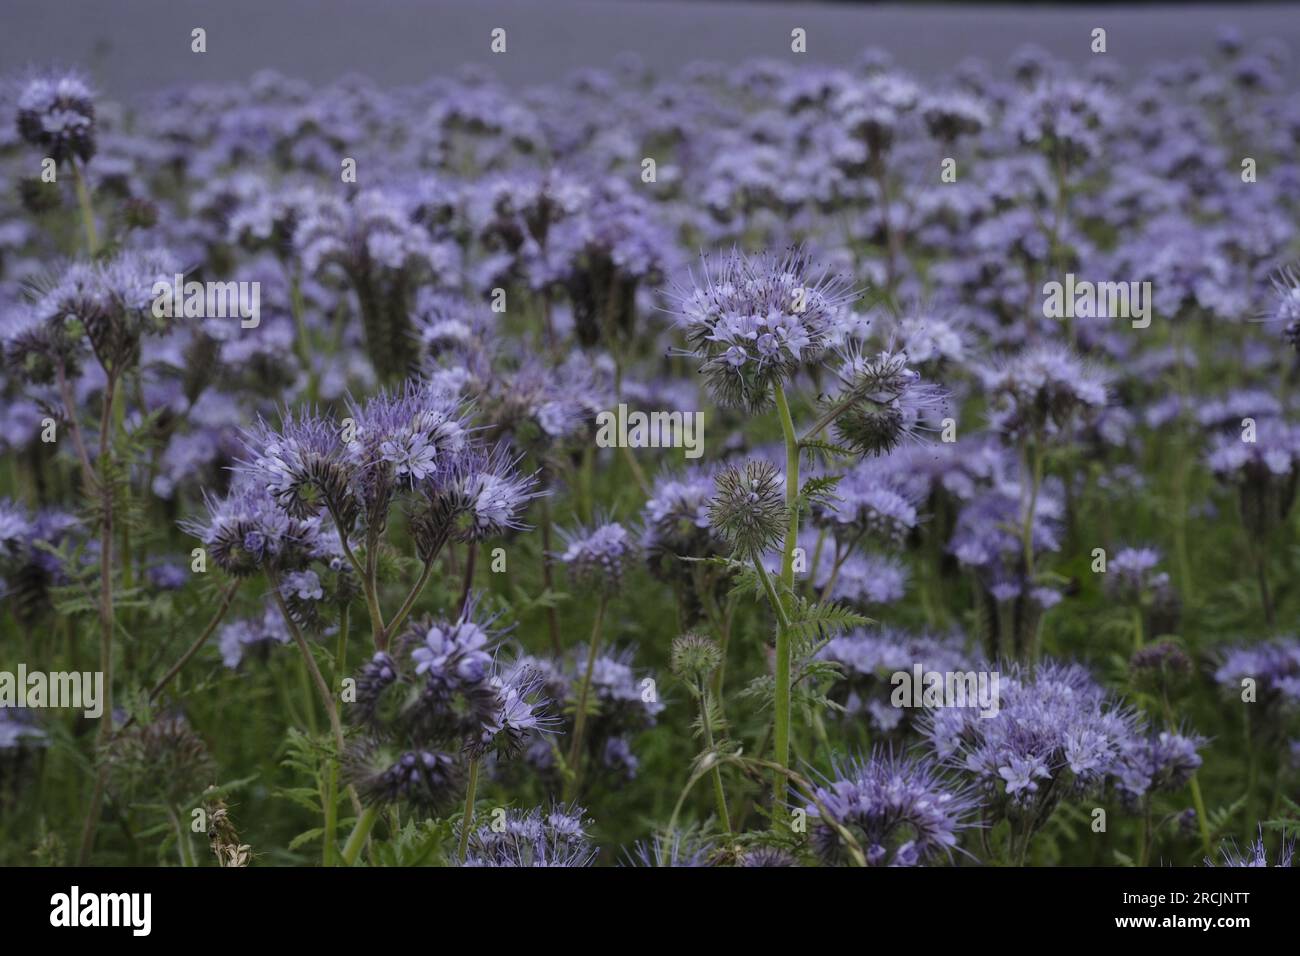 Denholm, UK. 15th July, 2023. Farm crop, Phacelia, carpet the fields near to Denholm in the Scottish Borders. The crop used as a soil improving green manure. An annual species. Phacelia is effective at preventing nitrogen leaching and suppressing weeds, due to its fast establishment. Although not known as a deep rooted species, its dense zone of shallow roots are very good at conditioning the top 3-4cm of soil. Credit: Rob Gray/Alamy Live News Stock Photo